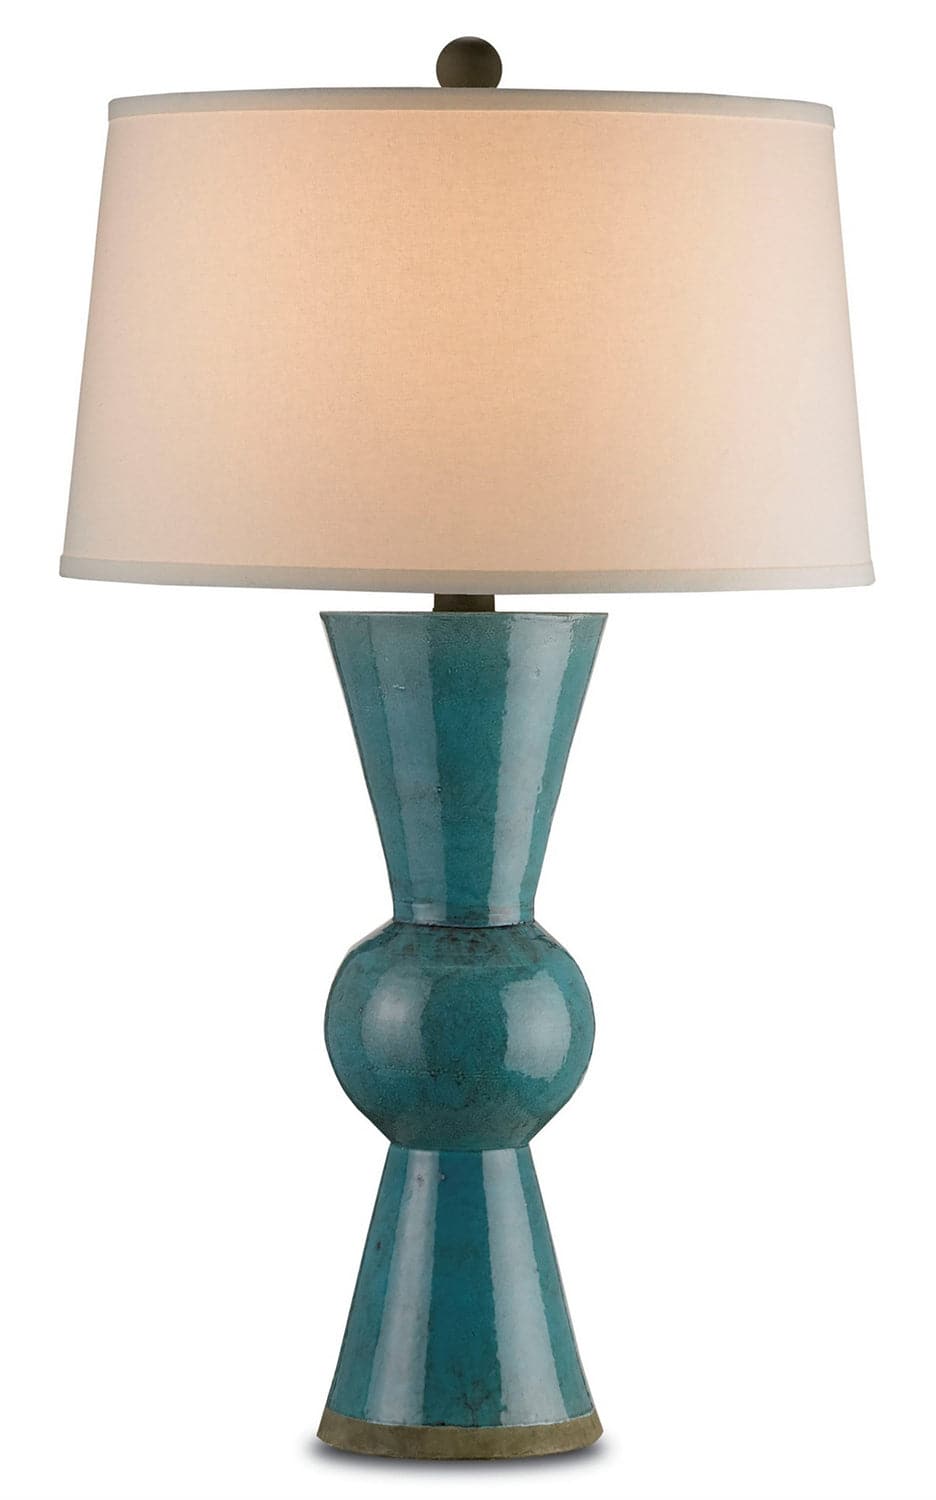 One Light Table Lamp from the Upbeat collection in Teal finish